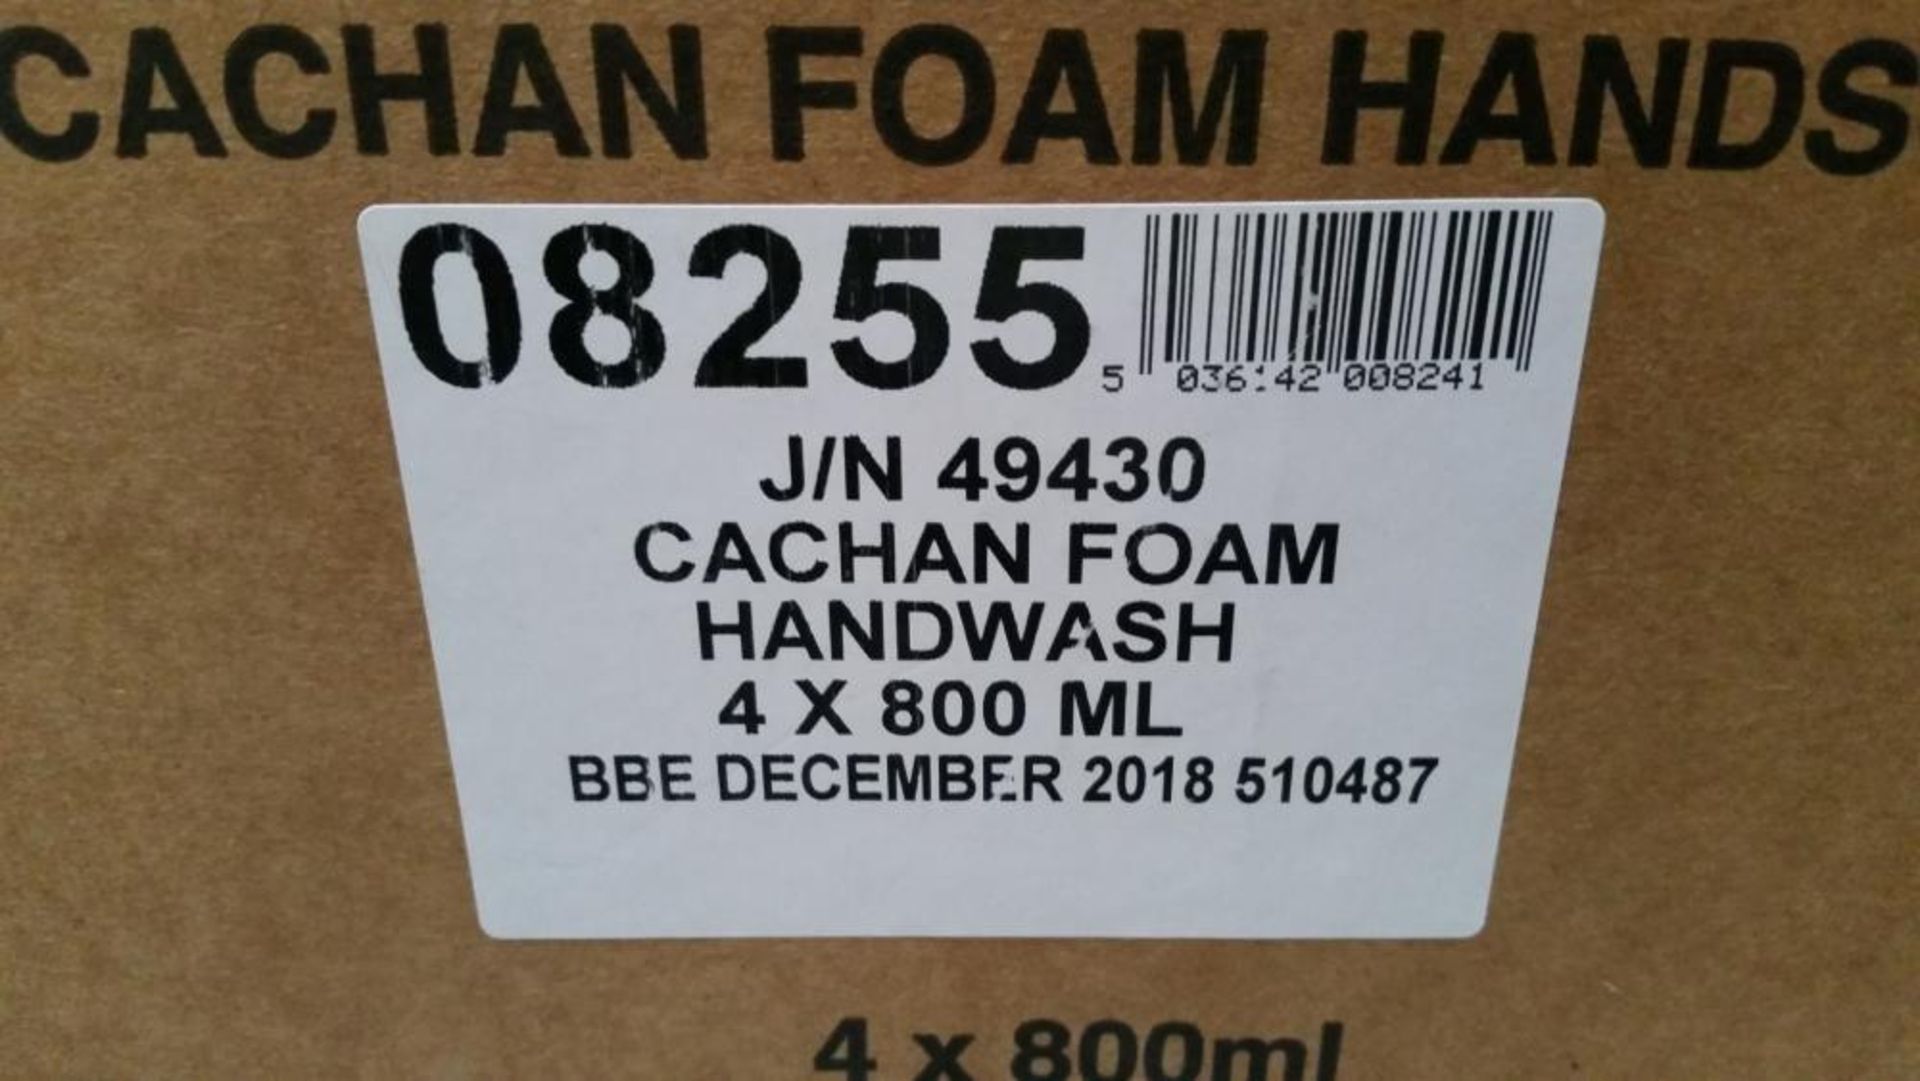 4 x Cachan Foam 800ml Handwash - Suitable For Foaming Dispnesers - Expiry December 2018 - New Boxed - Image 5 of 5